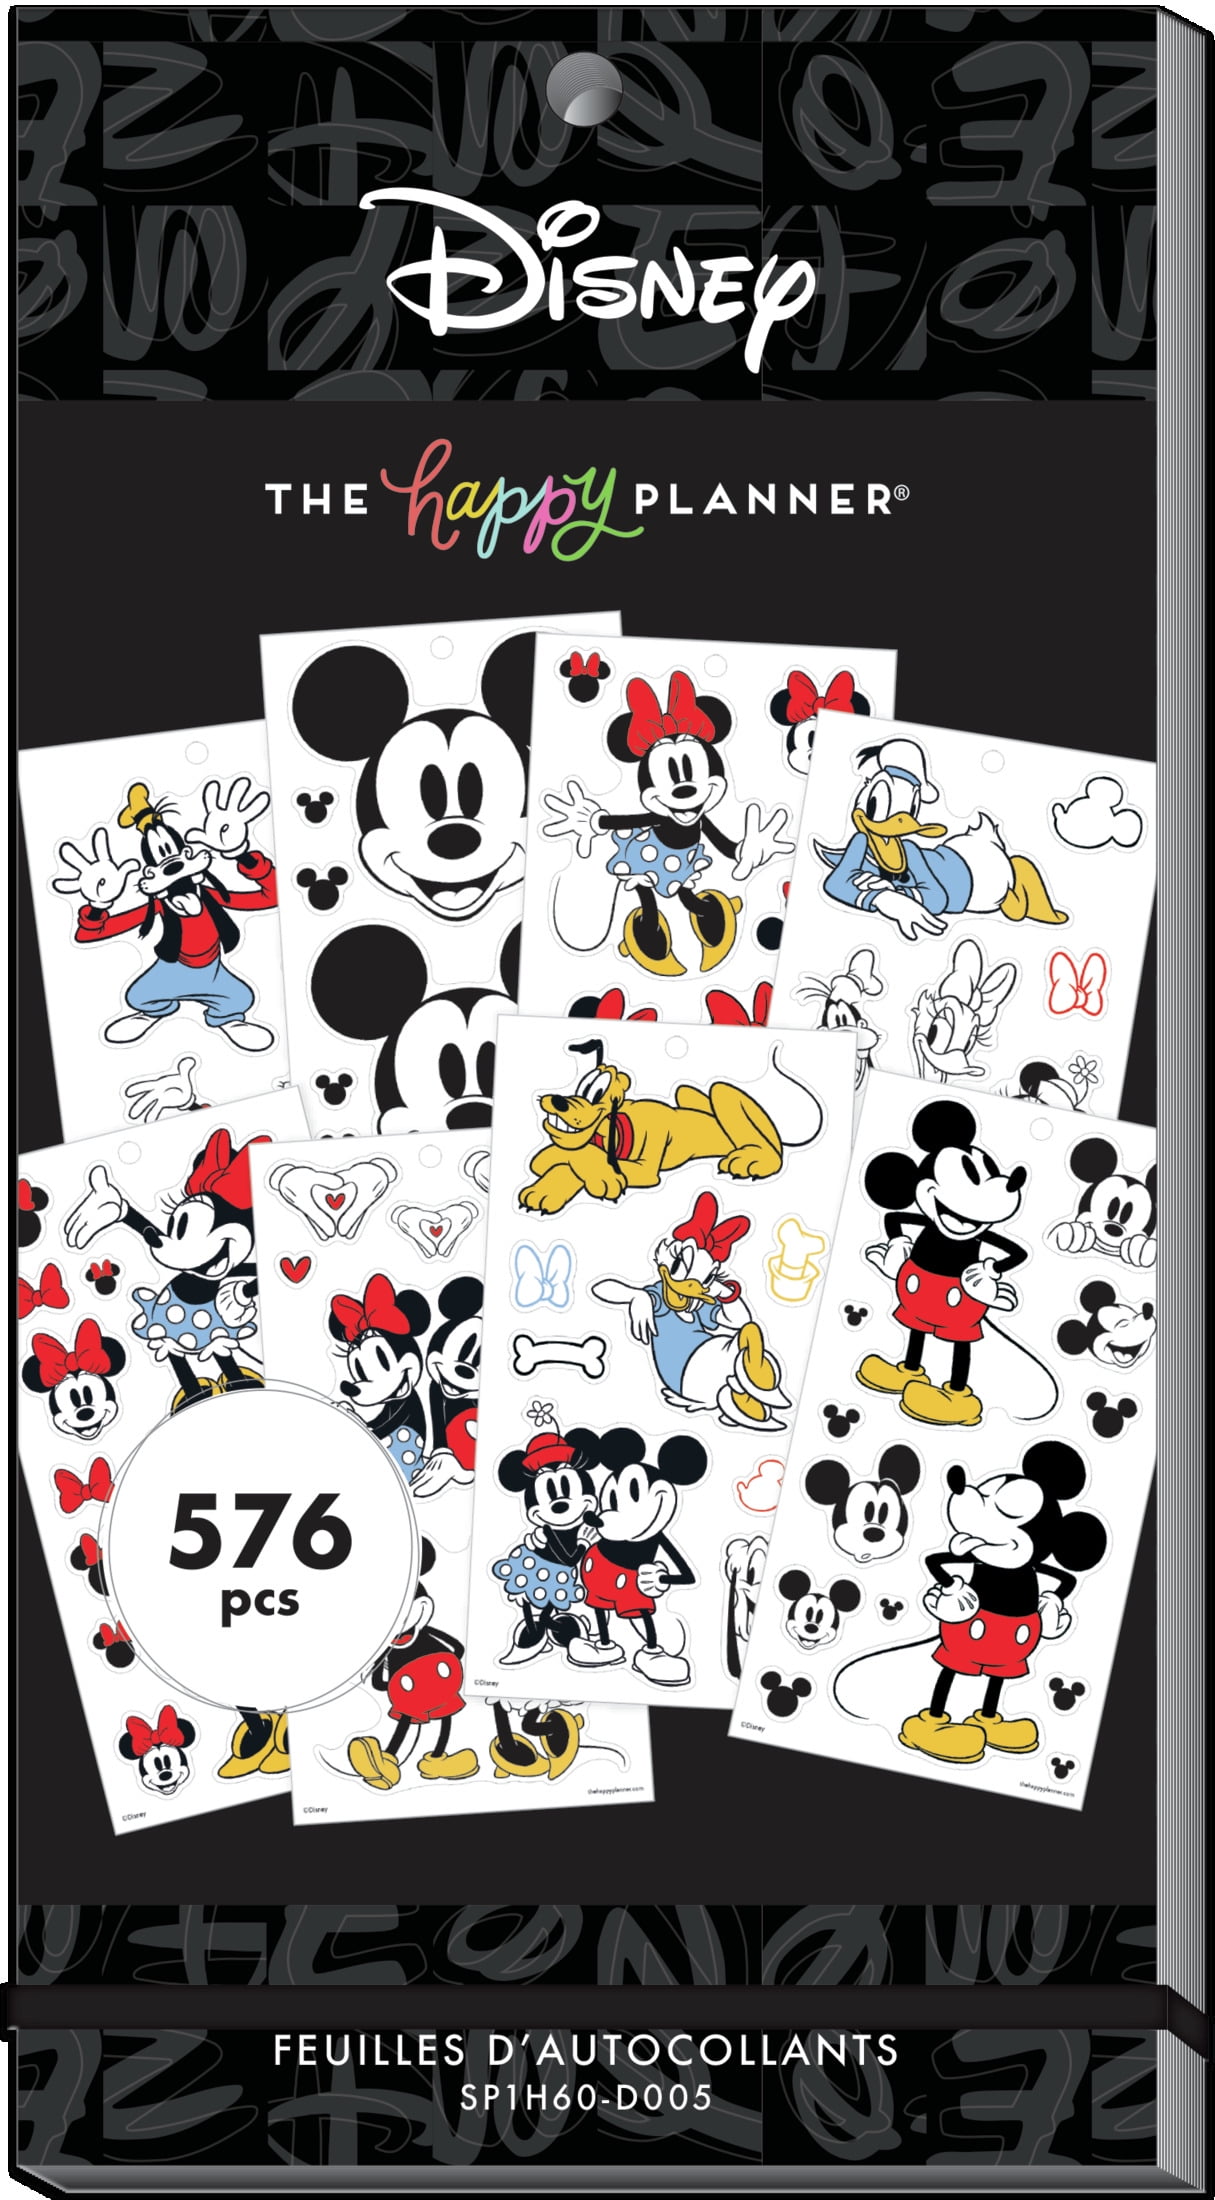 Disney Squad Goals 2021 The Happy Planner Classic Planner Blue Cover 